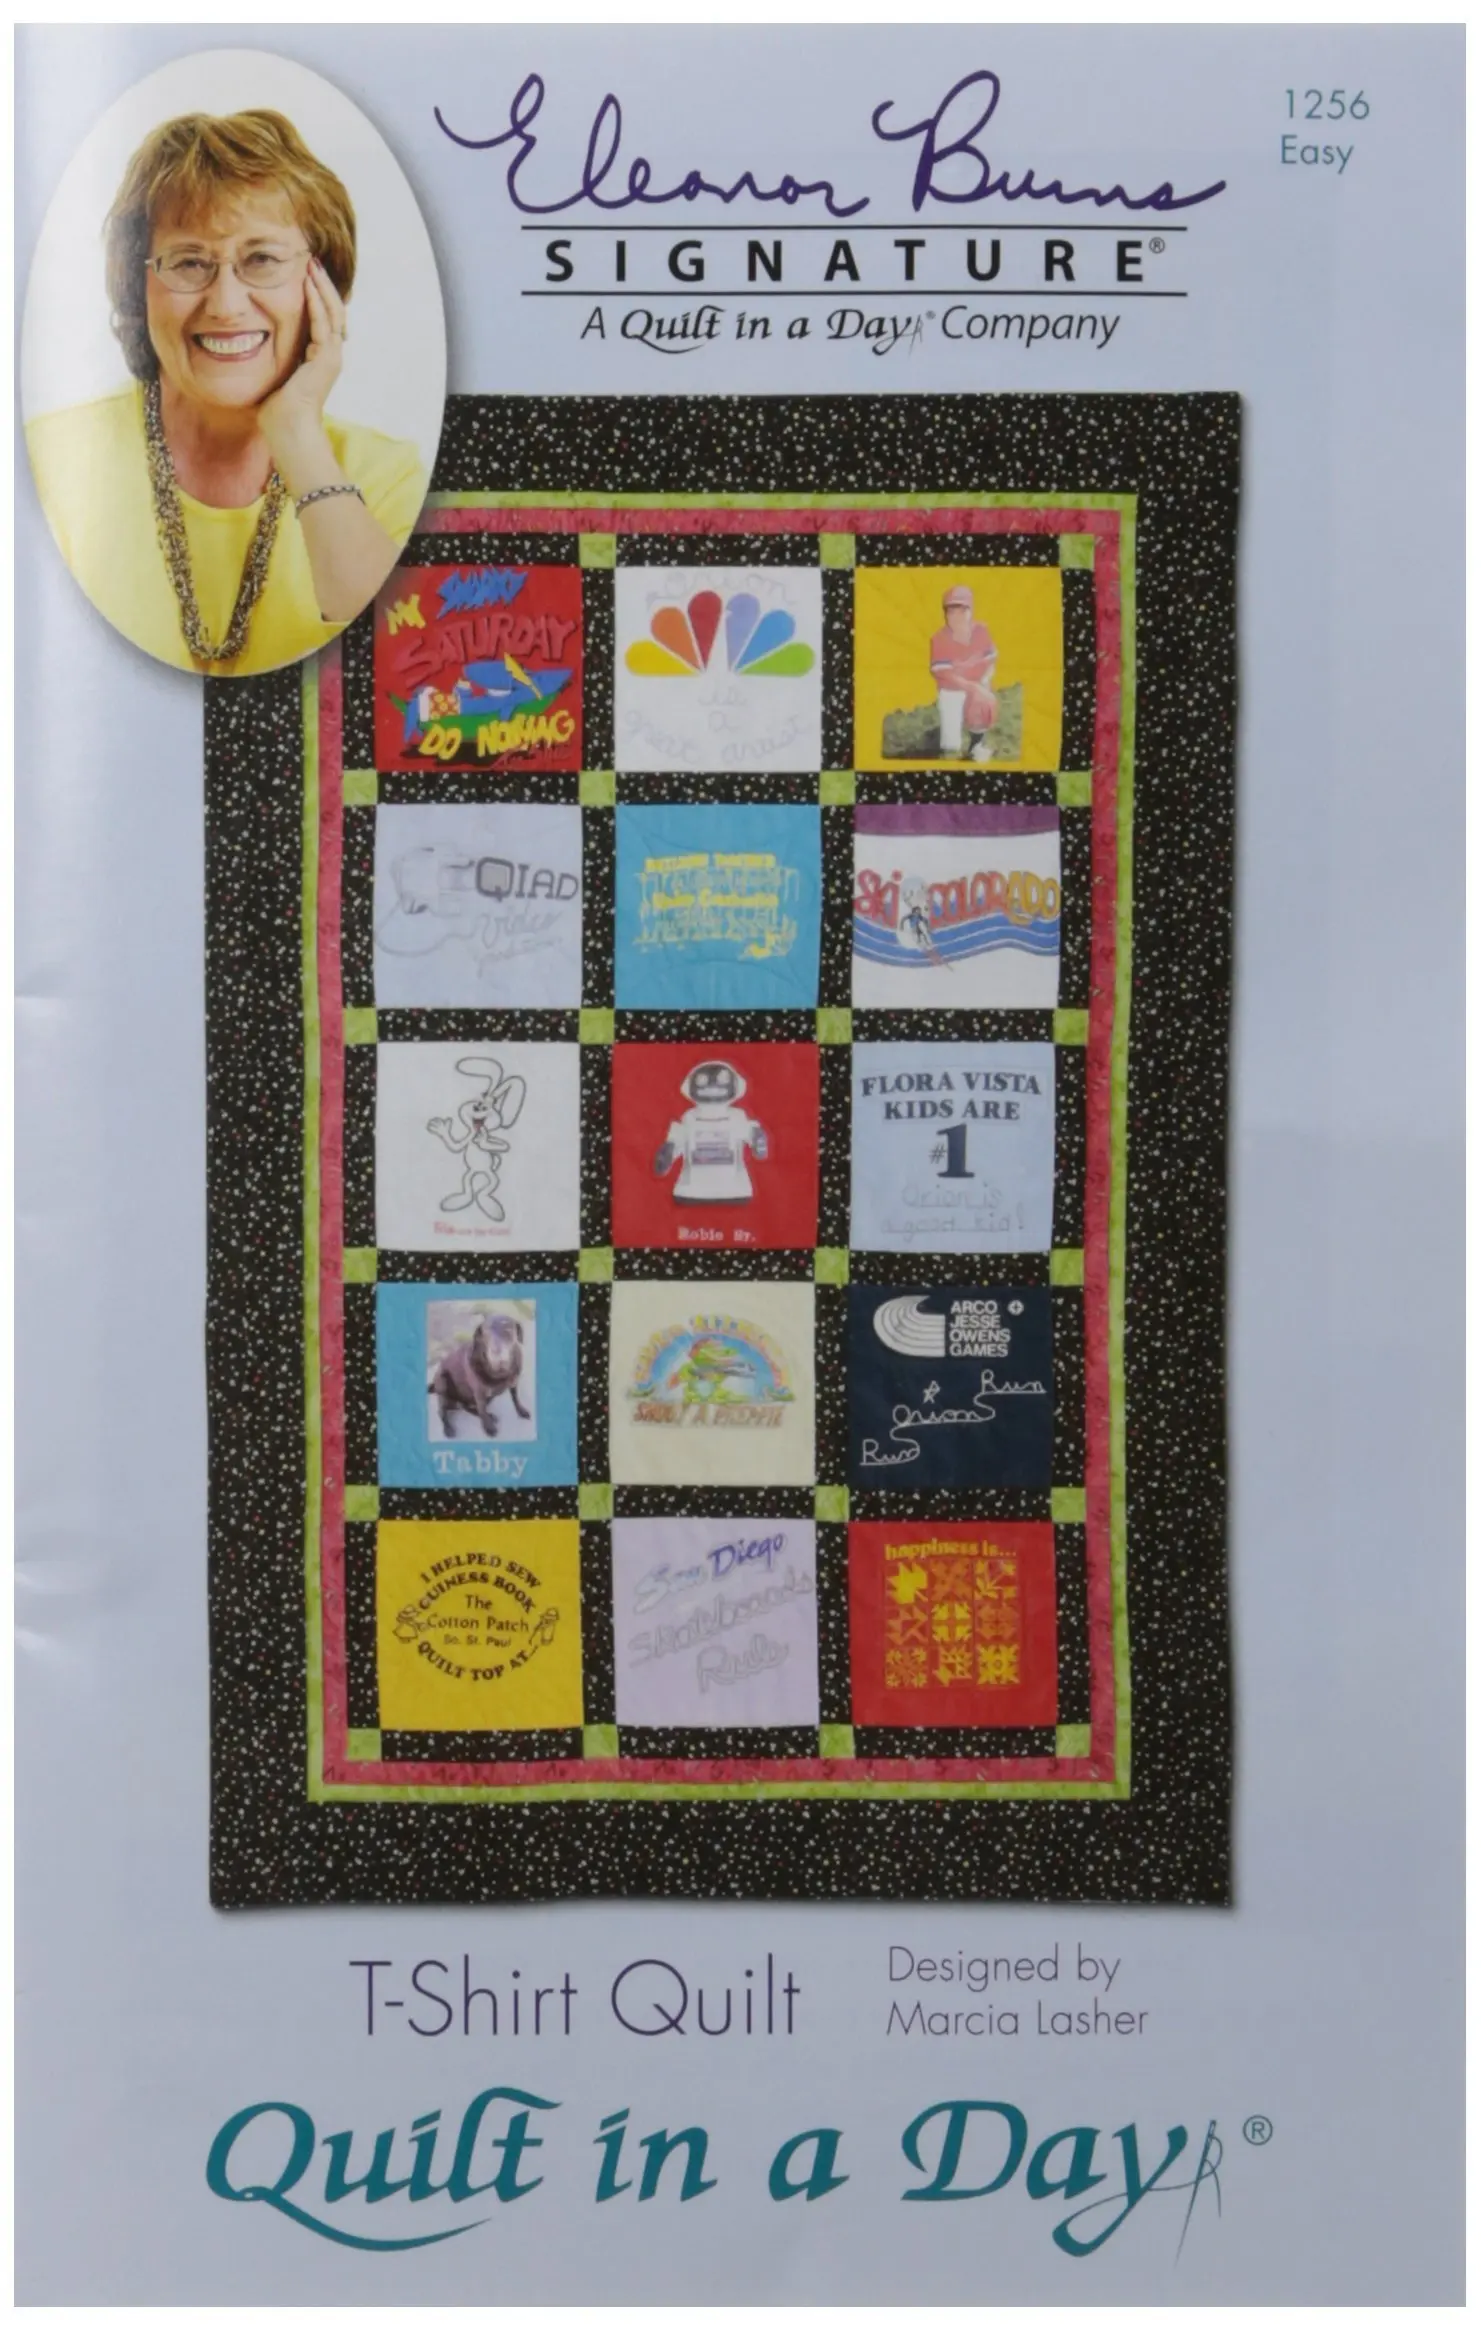 Download Cheap T Shirt Quilt Pattern Find T Shirt Quilt Pattern Deals On Line At Alibaba Com